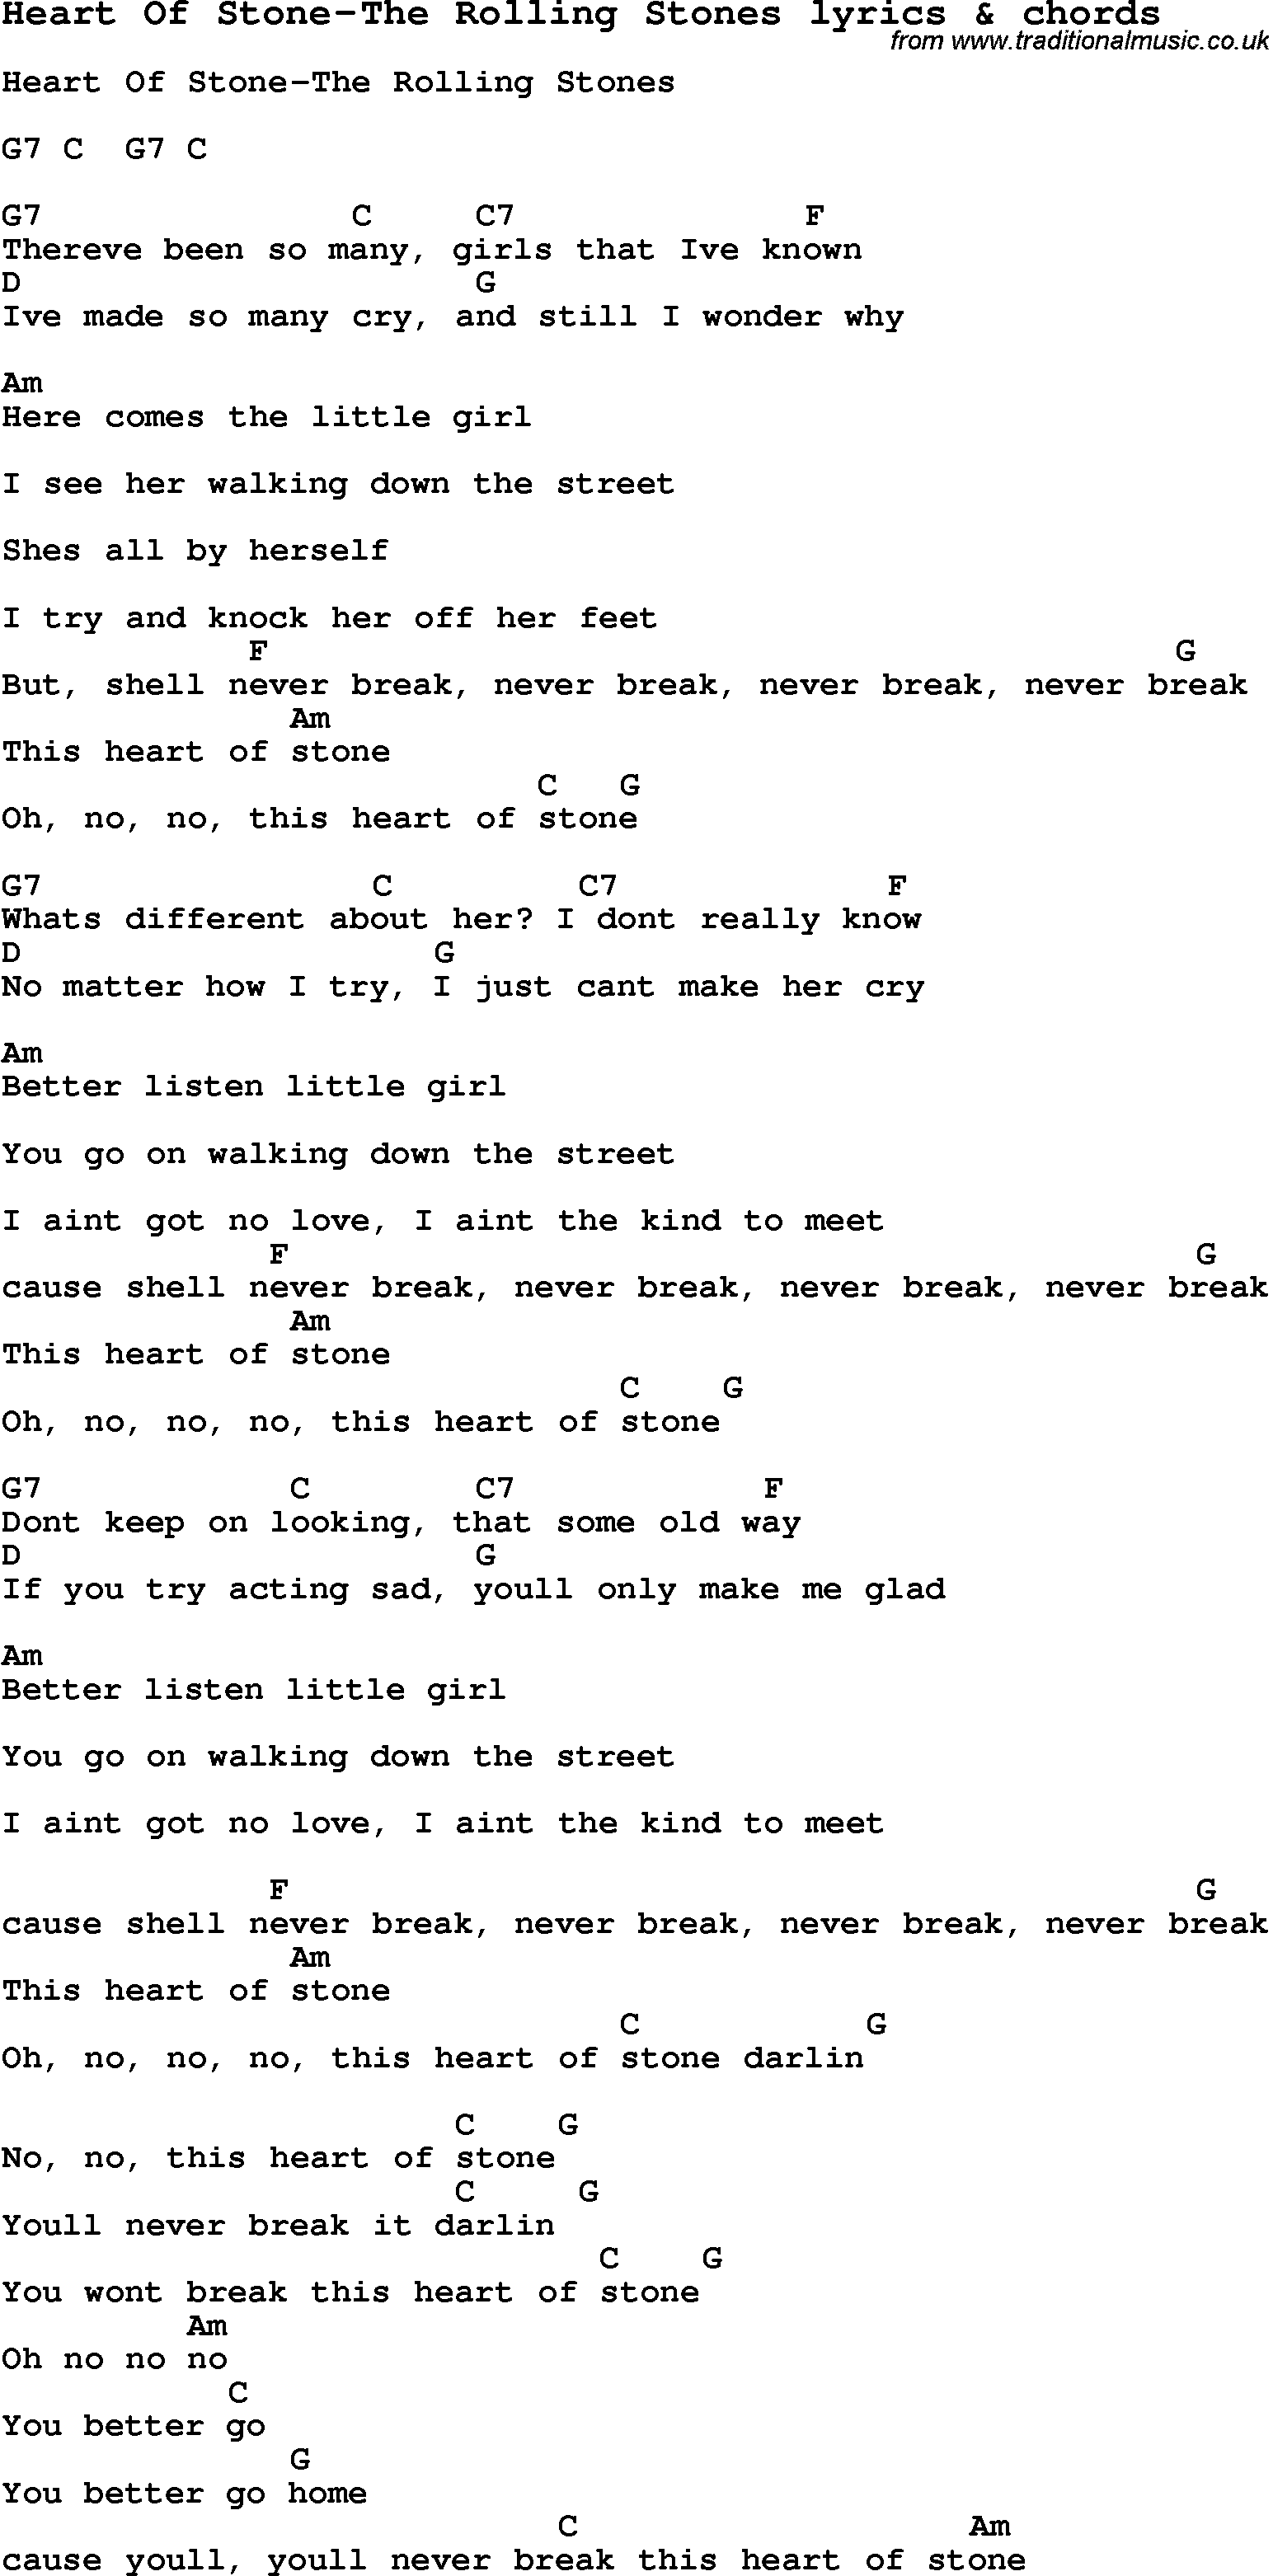 Love Song Lyrics for:Heart Of Stone-The Rolling Stones with chords.